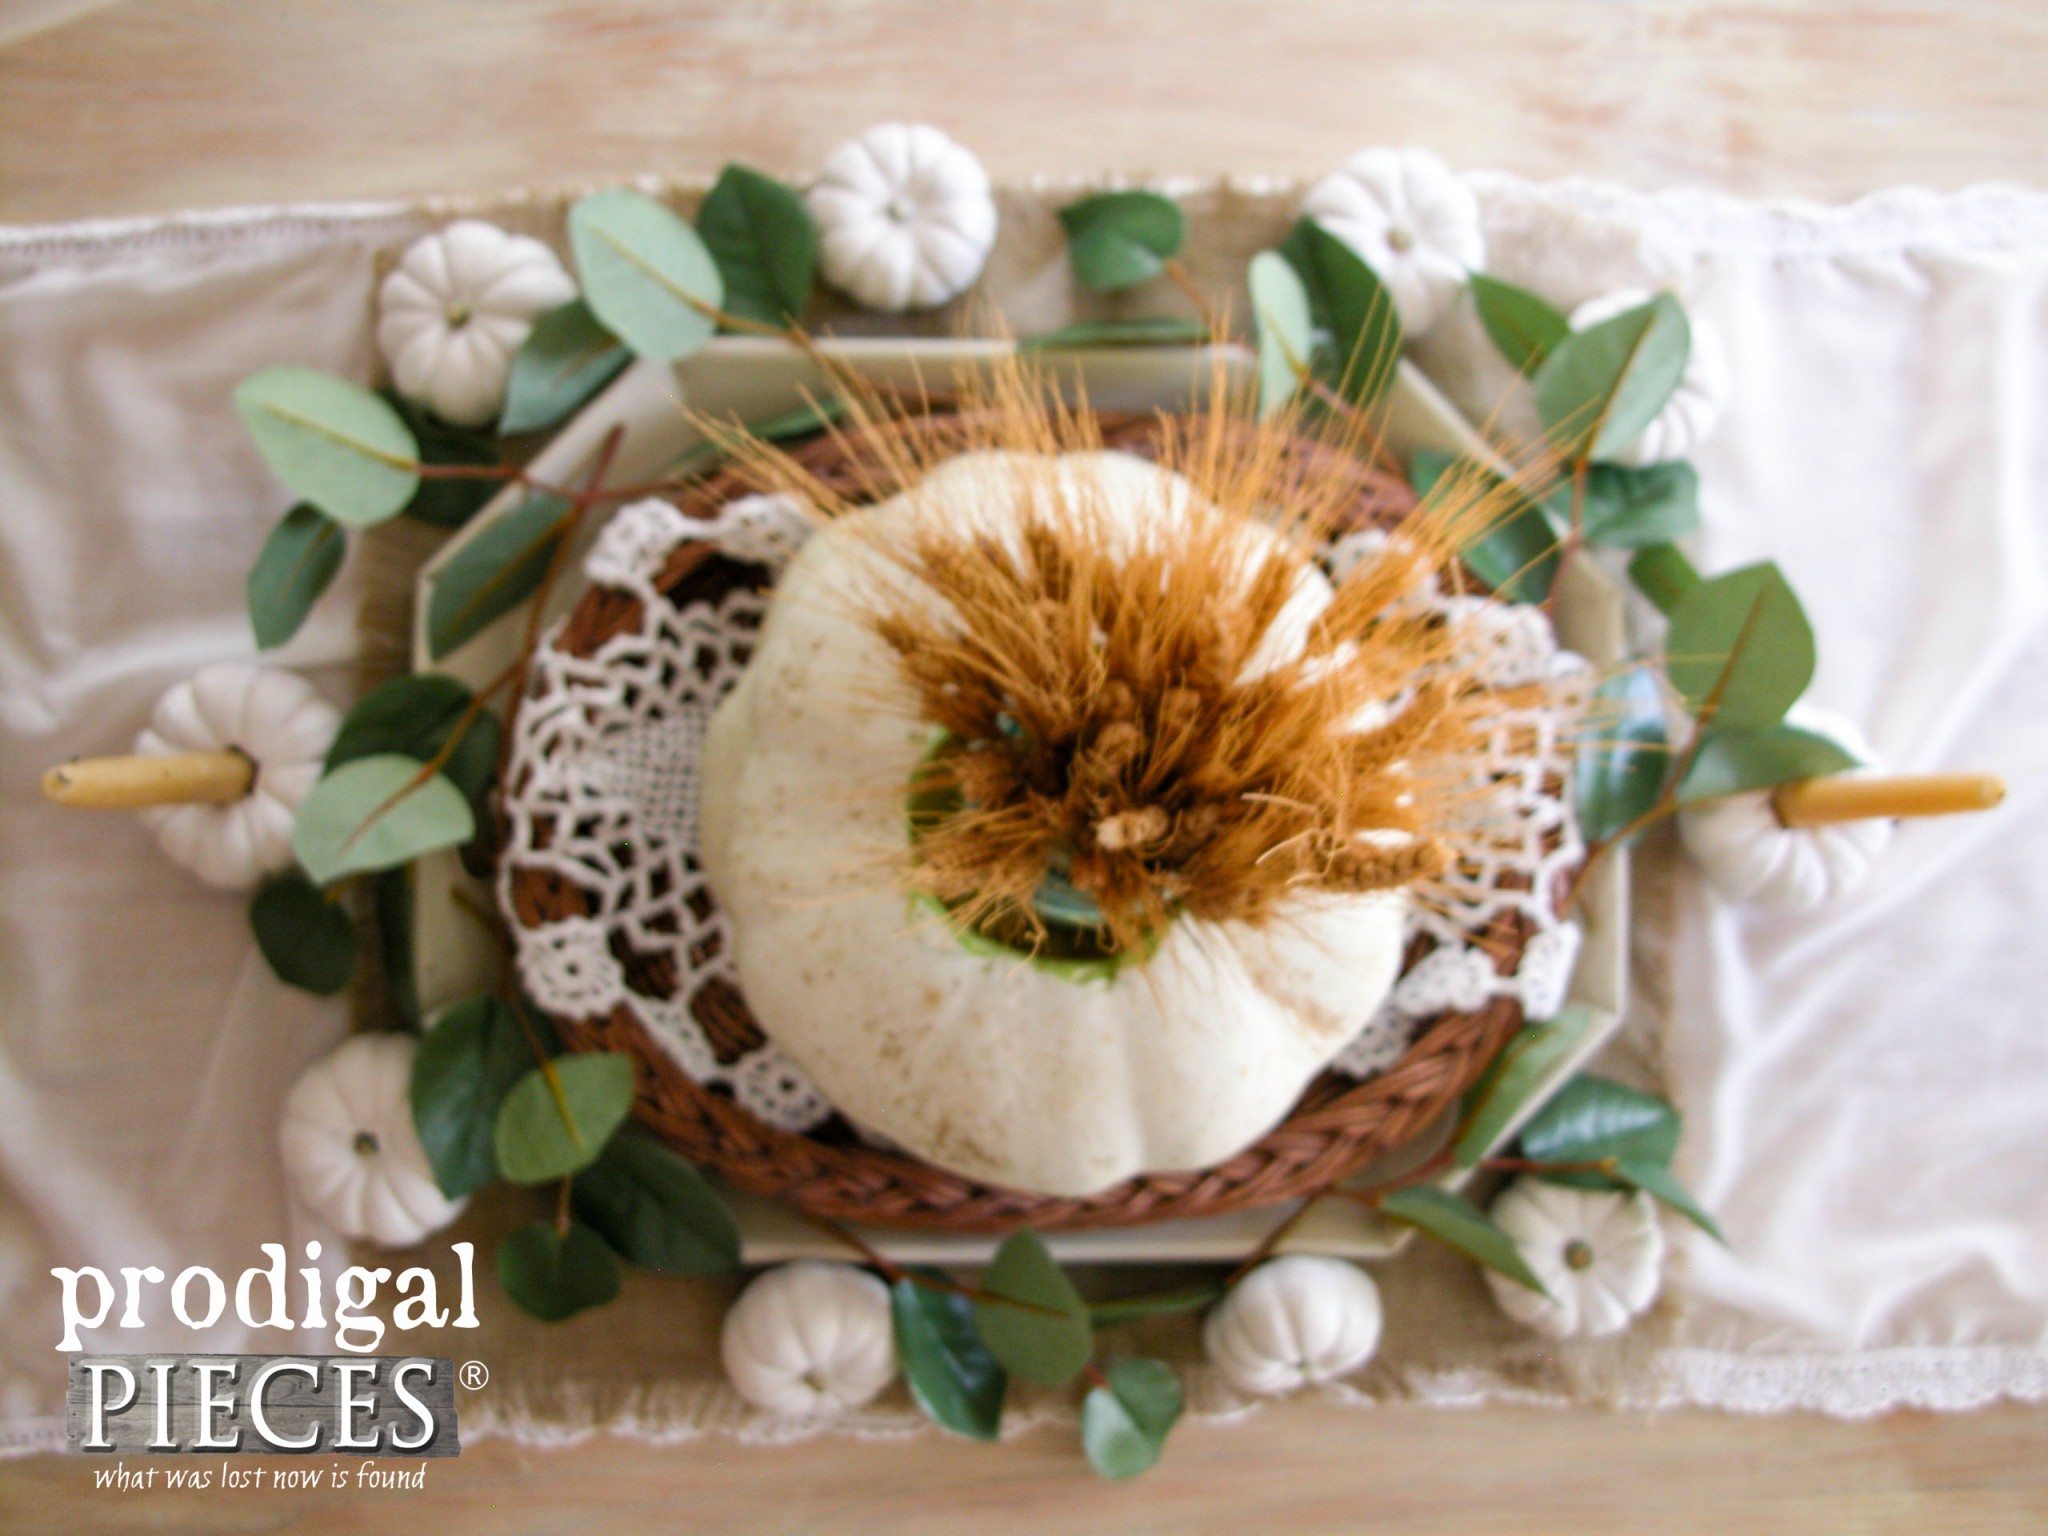 Rustic Farmhouse Style Thanksgiving Centerpiece Tutorial by Prodigal Pieces | www.prodigalpieces.com